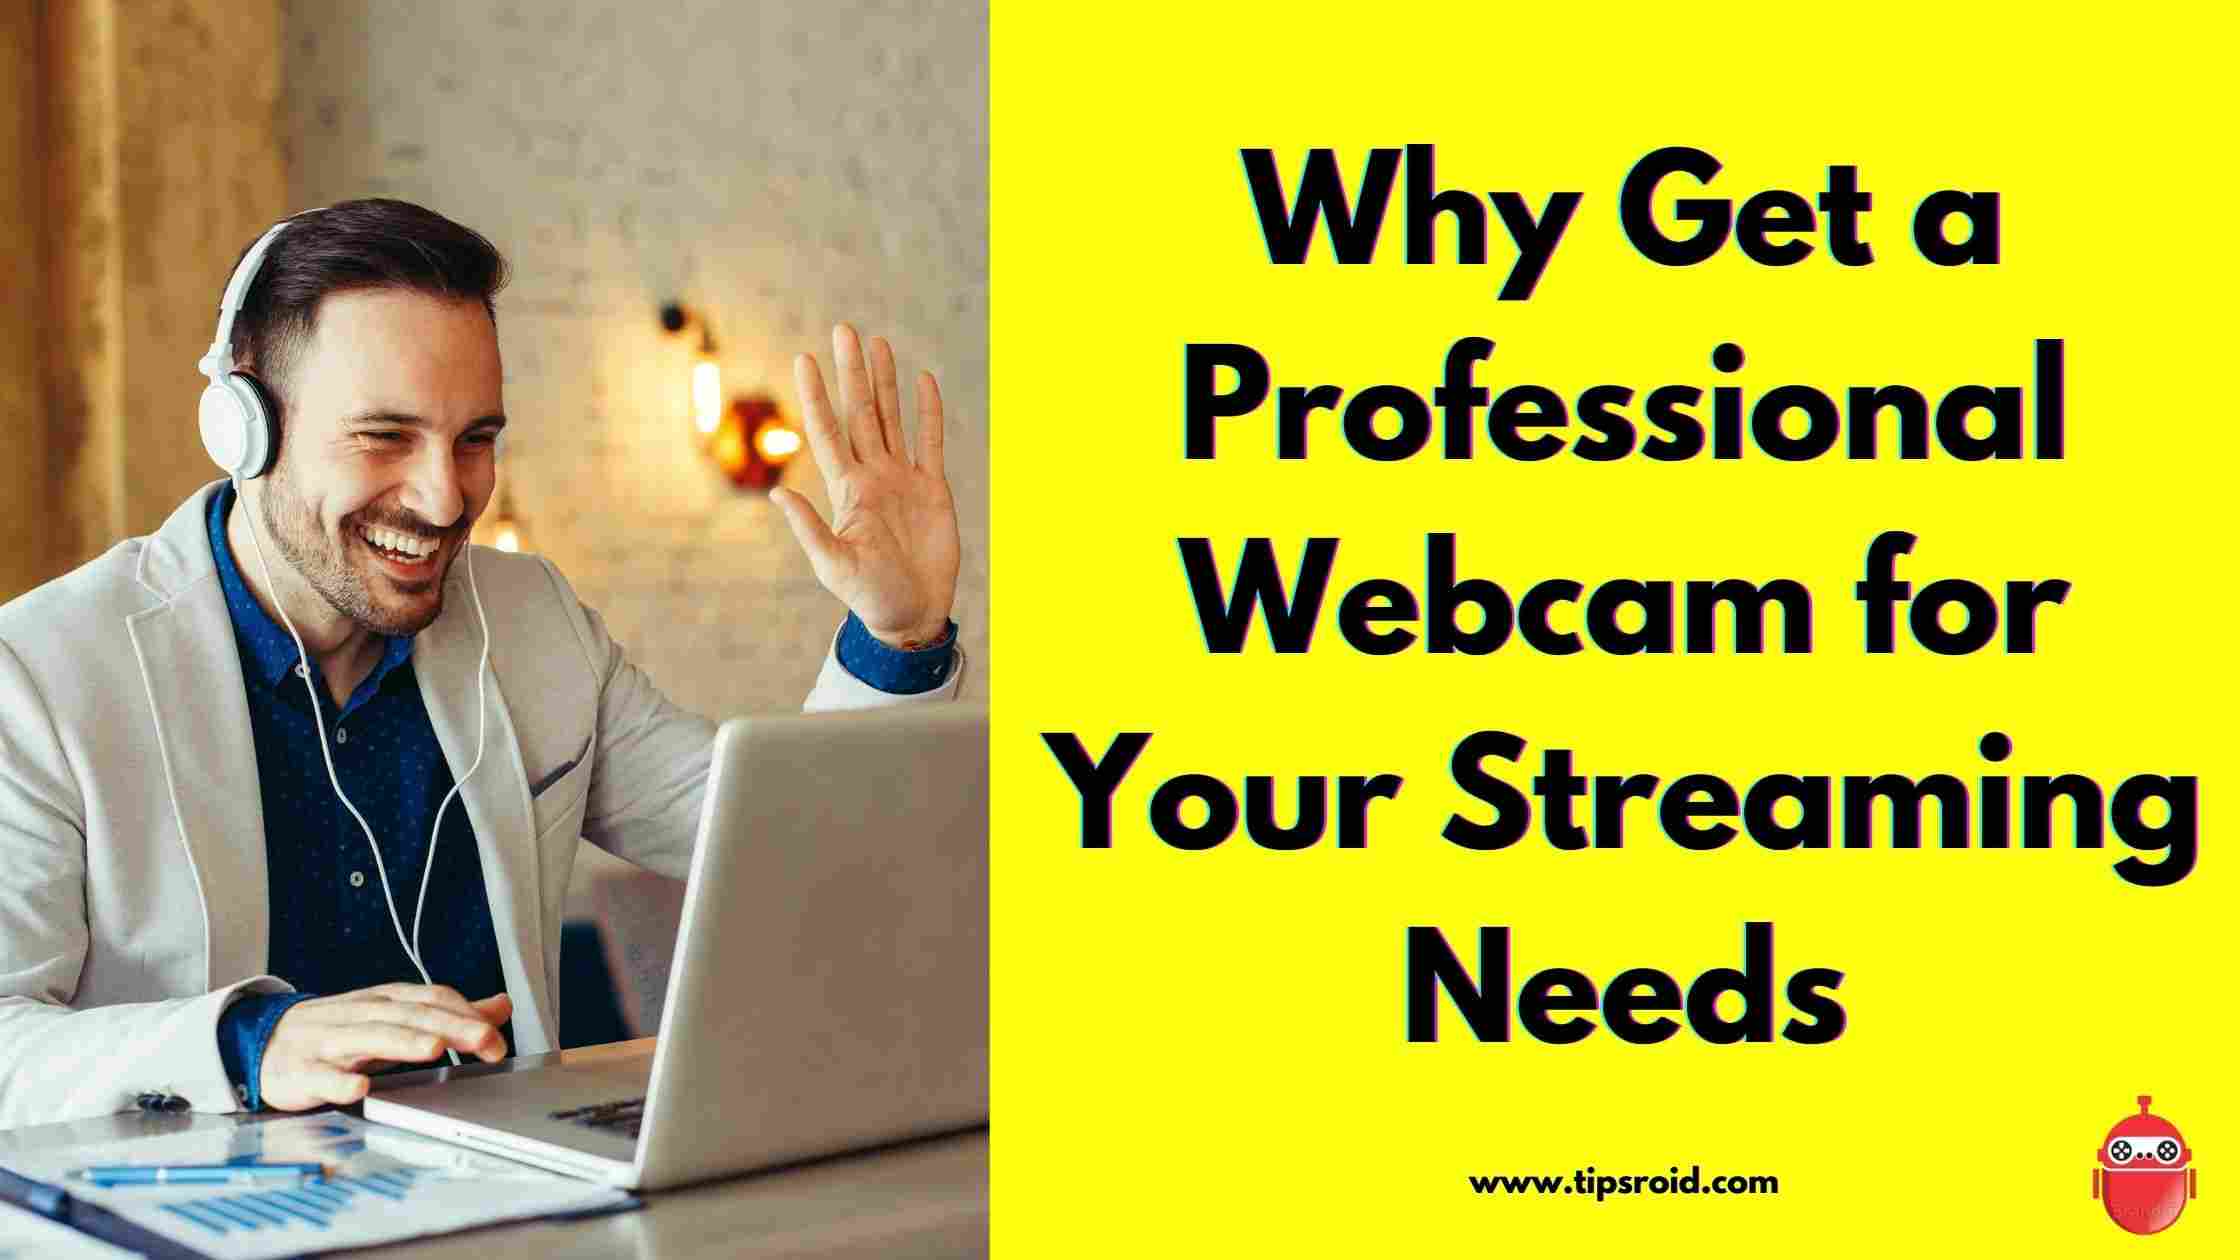 Why Get a Professional Webcam for Your Streaming Needs